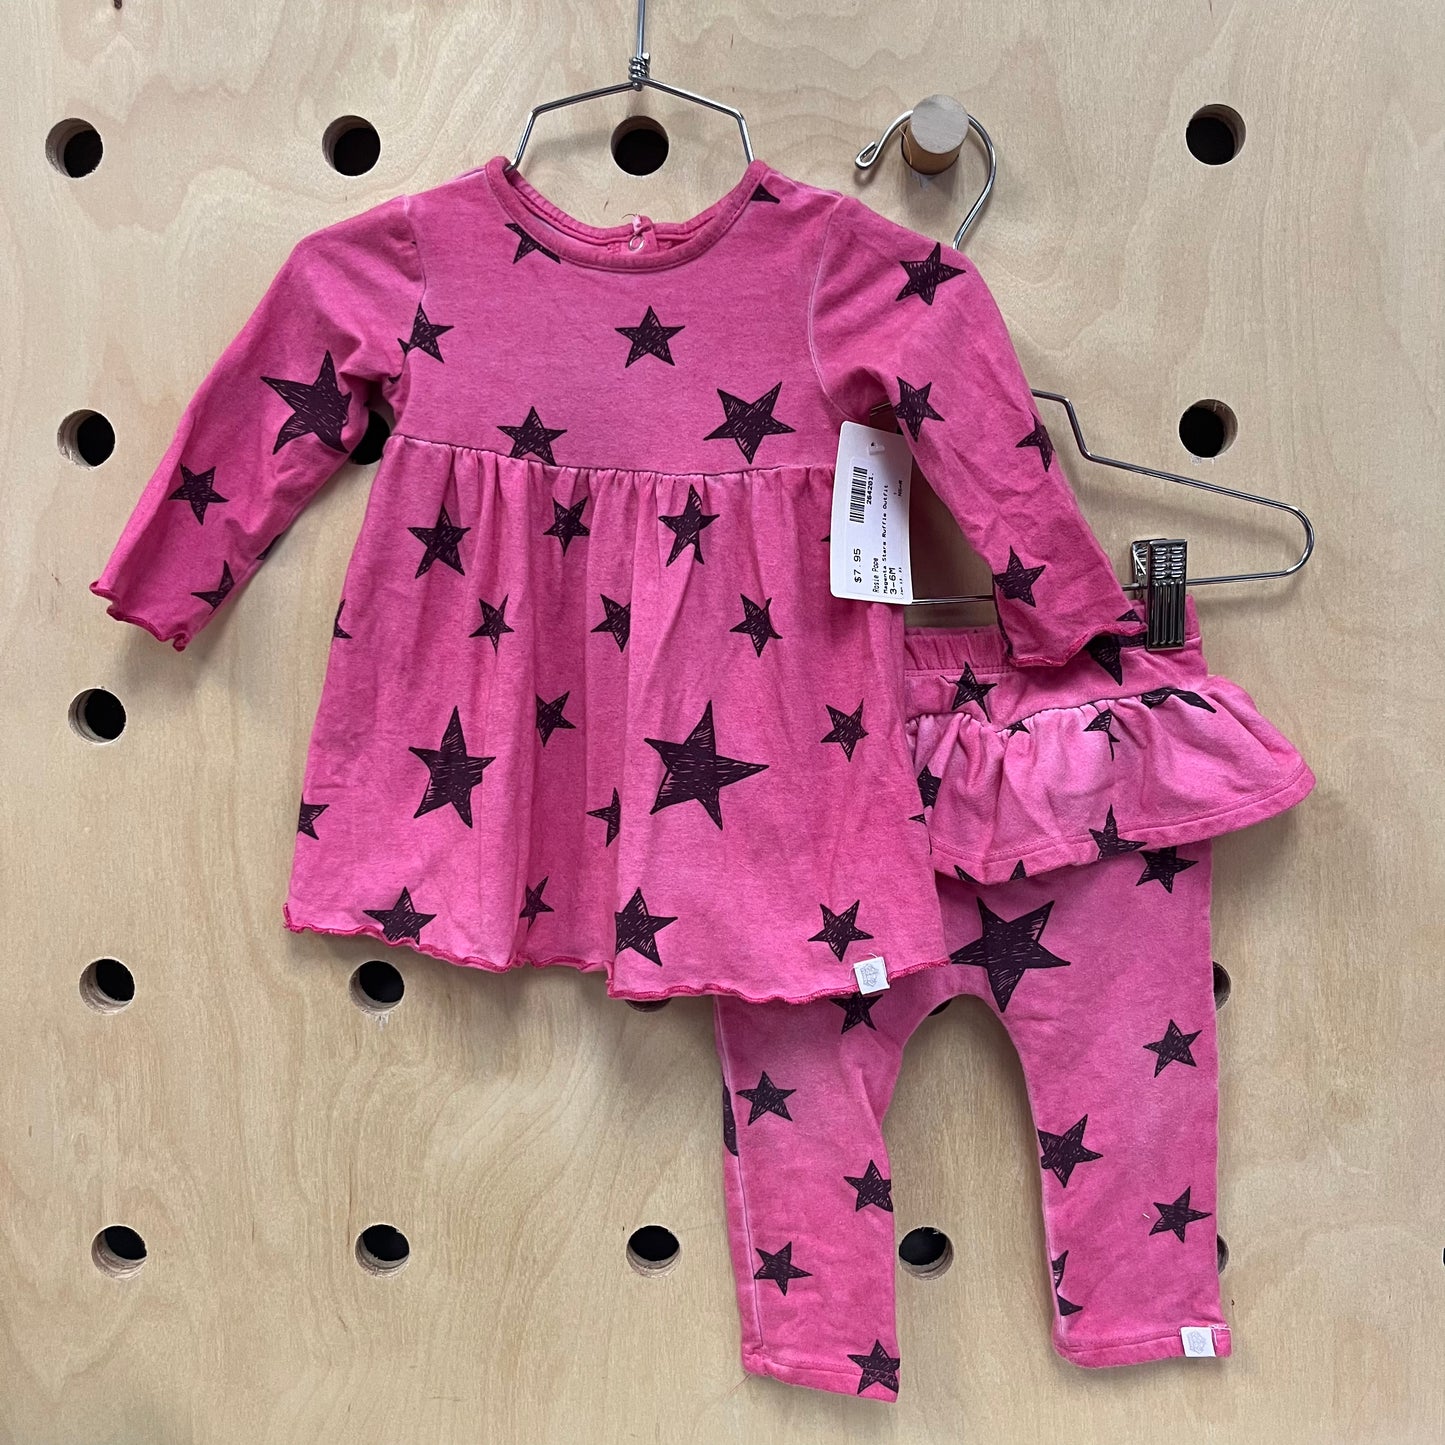 Magenta Stars Ruffle Outfit